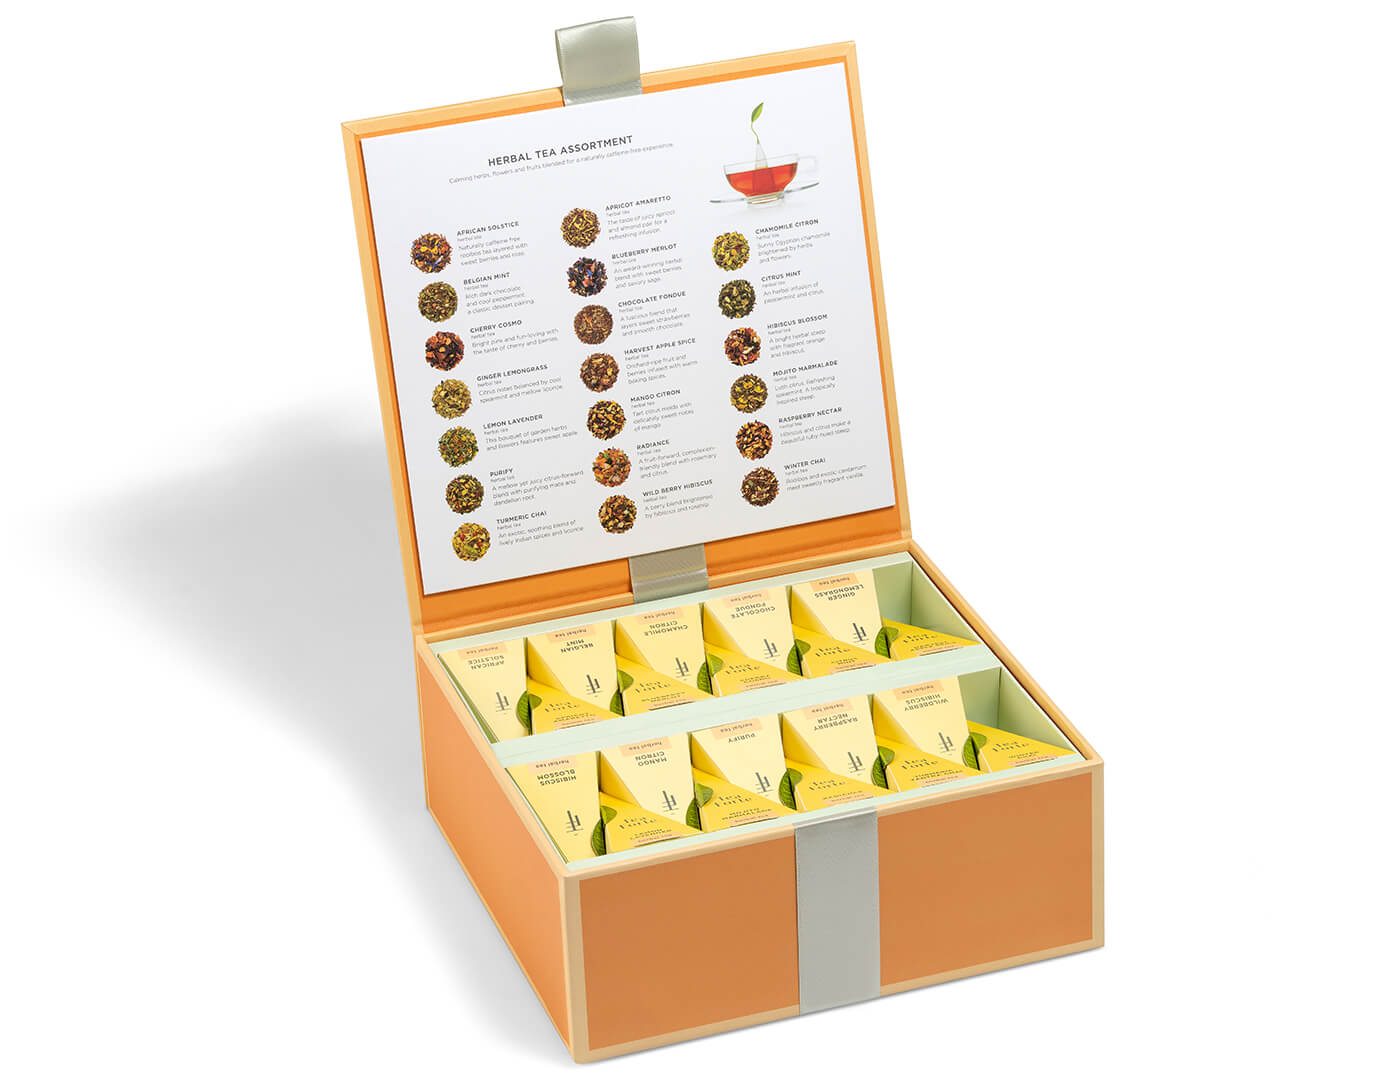 Herbal Tea Tasting assortment in a 40 count tea chest of pyramid infusers with lid open